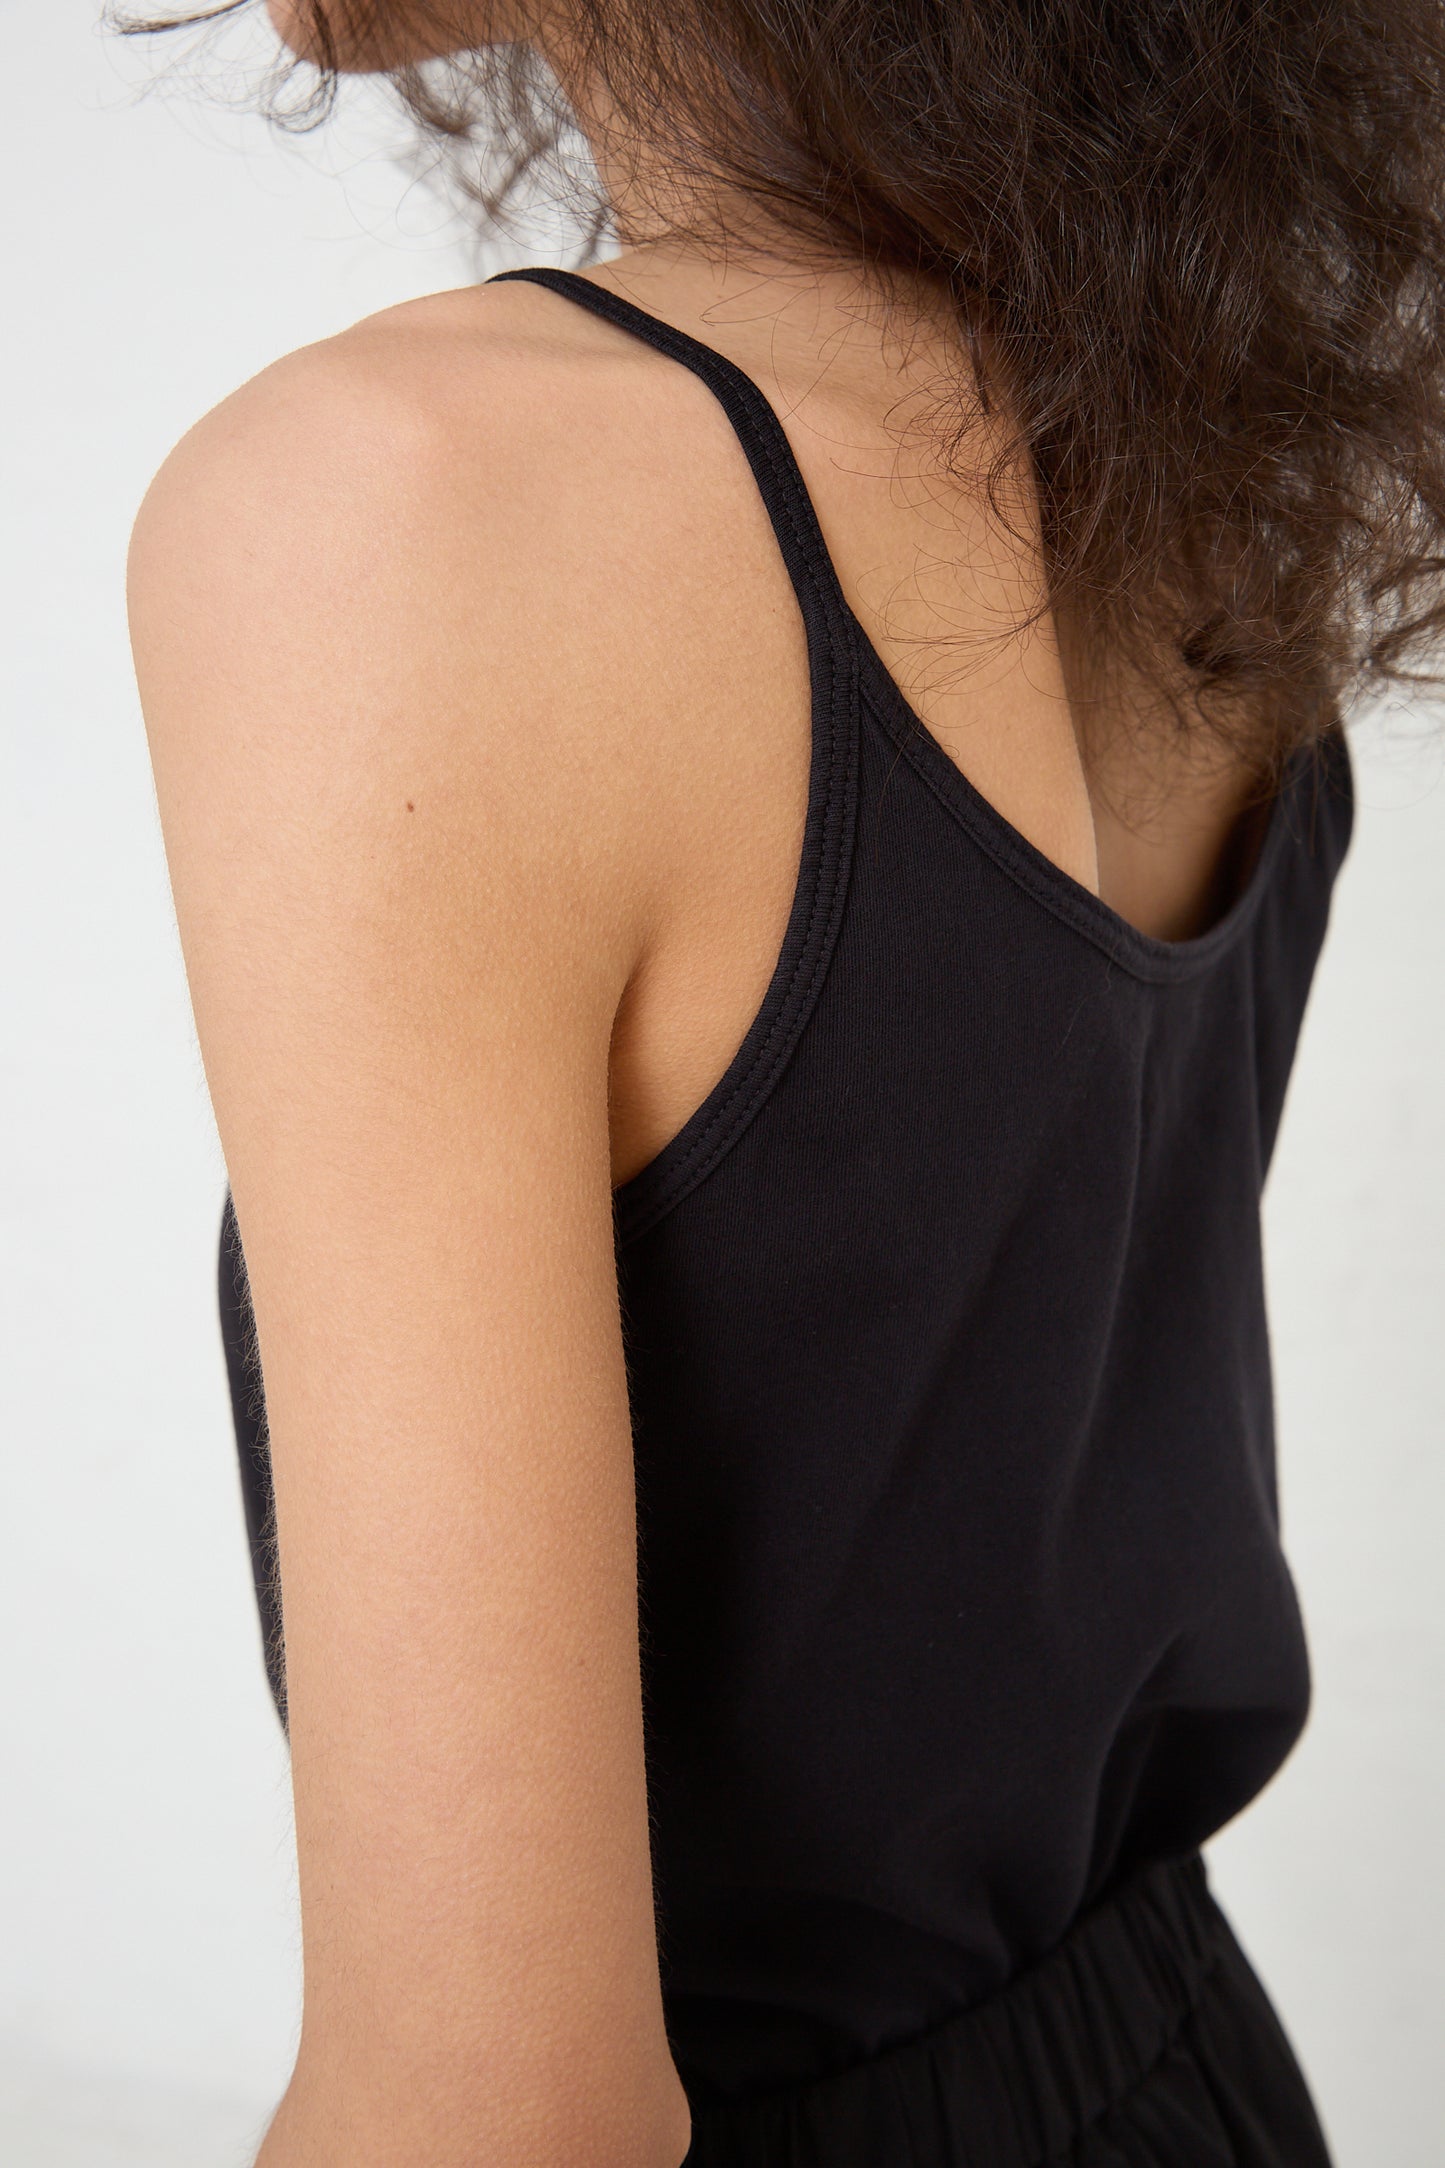 Woman wearing a Black Crane organic Cotton Jersey Camisole in Black, seen from behind at a slightly angled view.